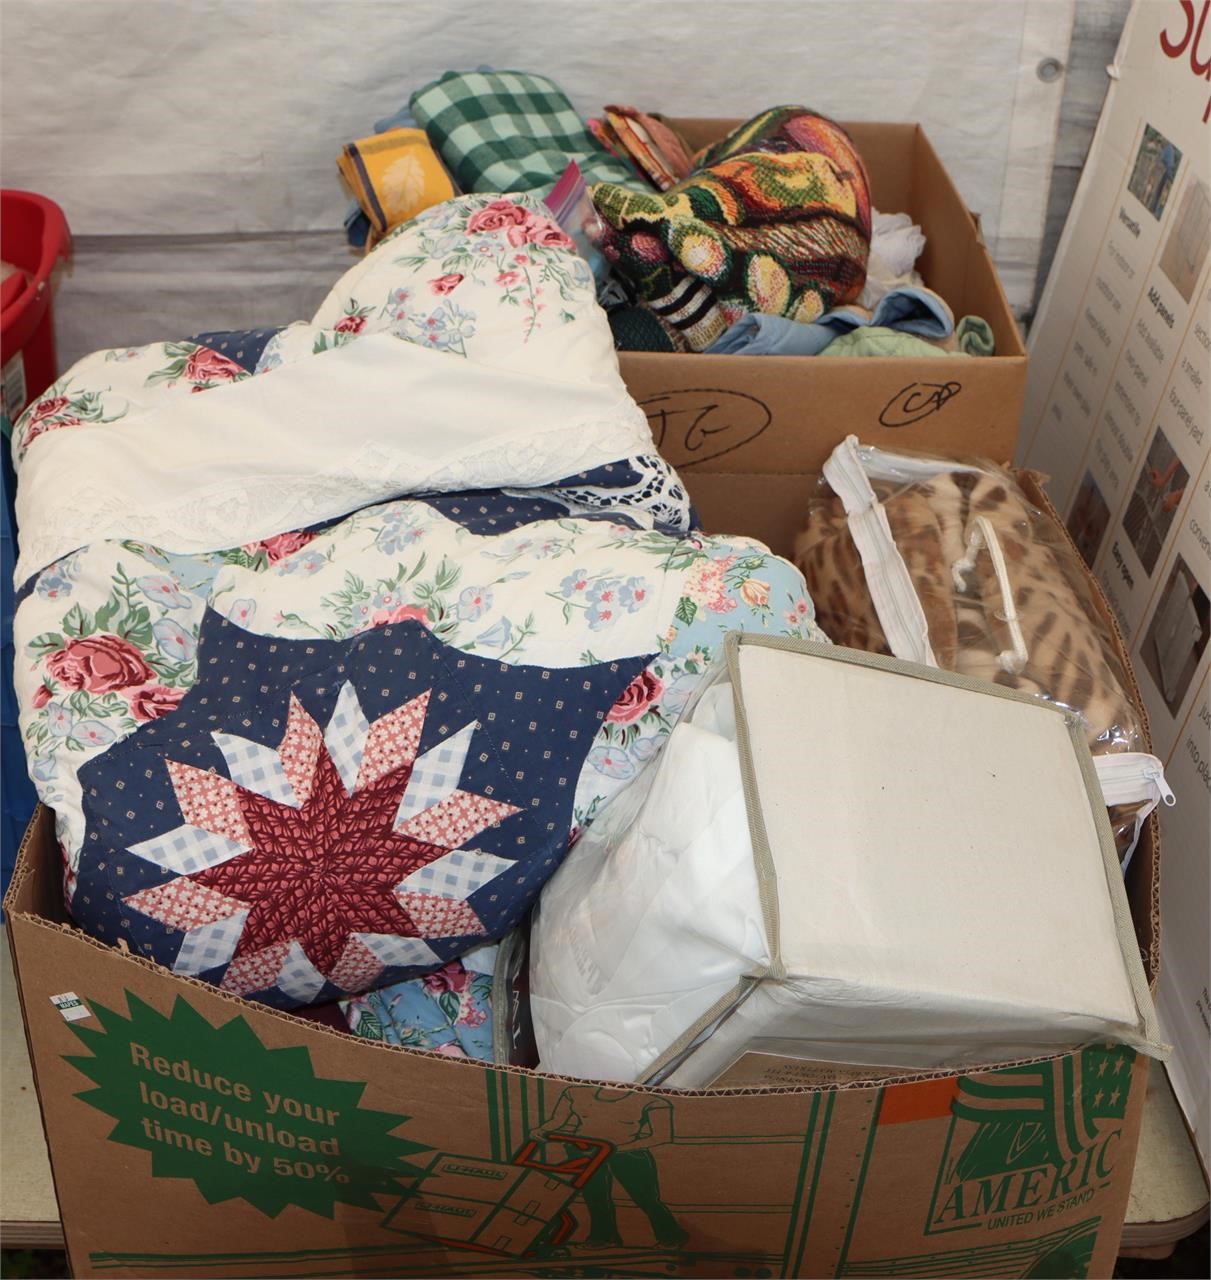 (2) Boxes of Blankets & Linens